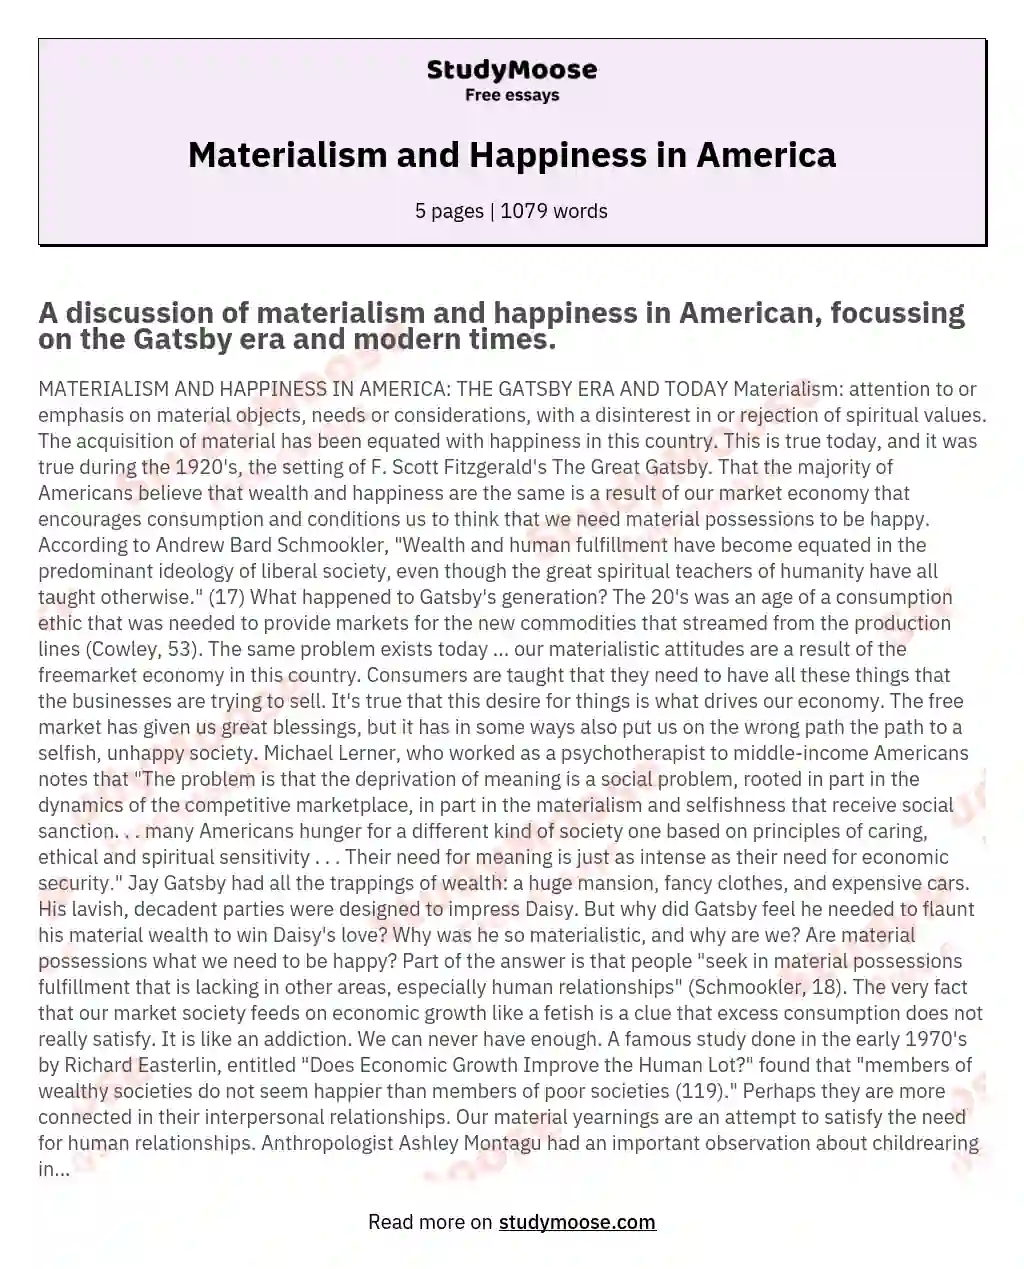 Materialism and Happiness in America essay